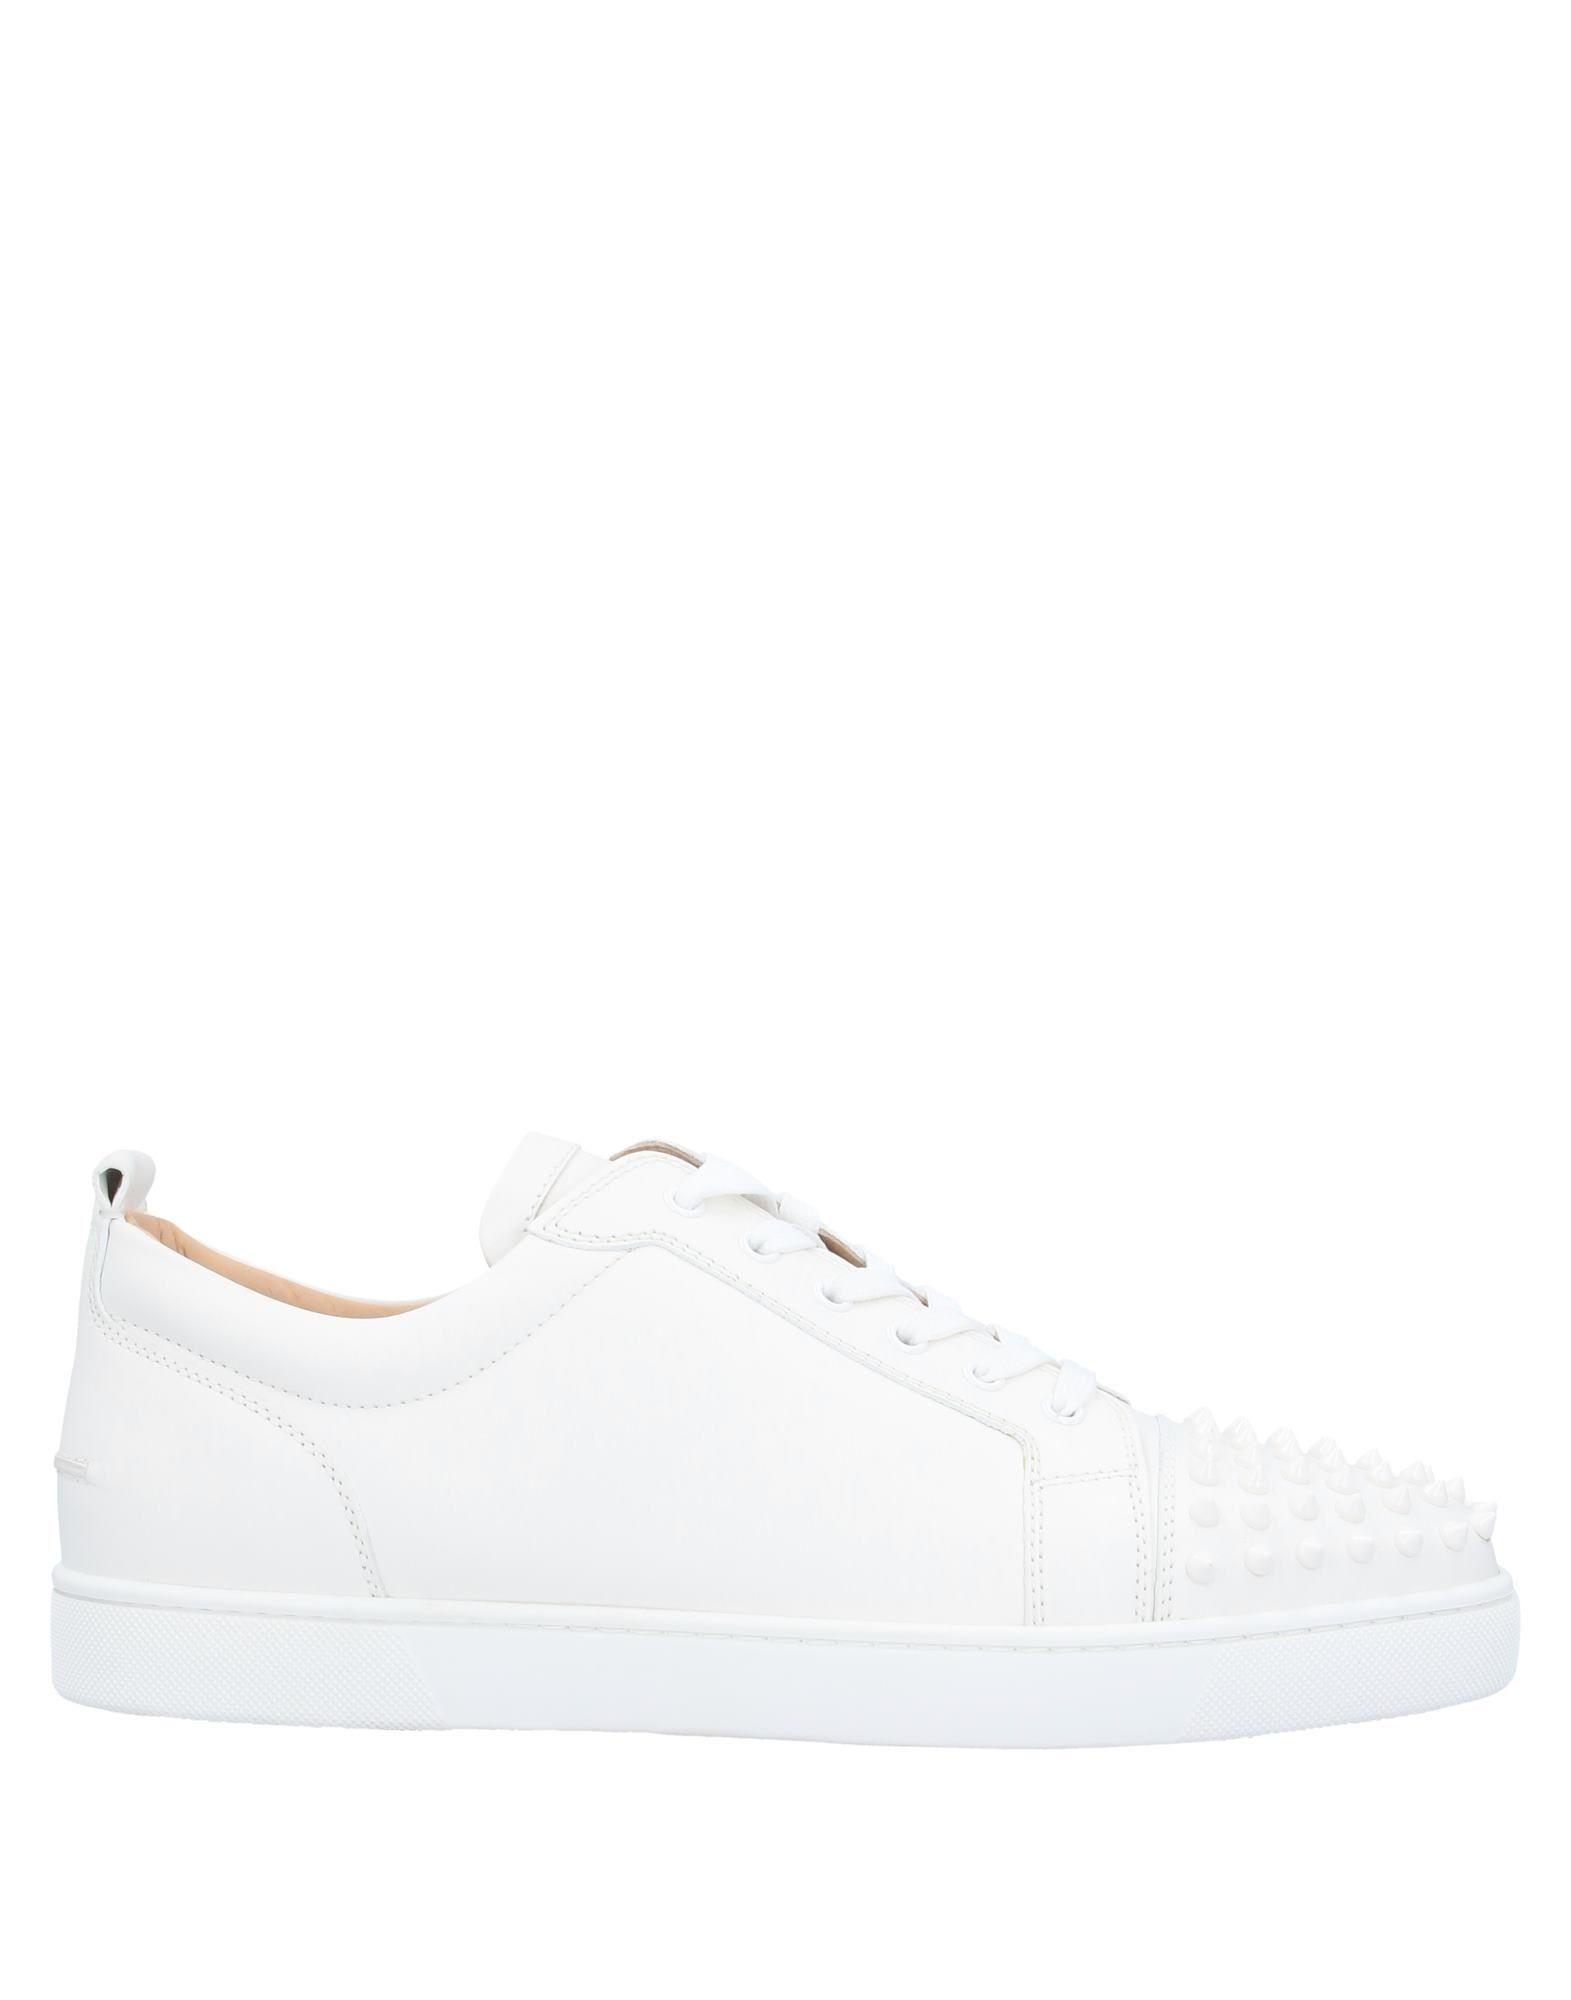 Christian Louboutin Leather Louis Spike-embellished Trainers in White for  Men - Save 56% - Lyst